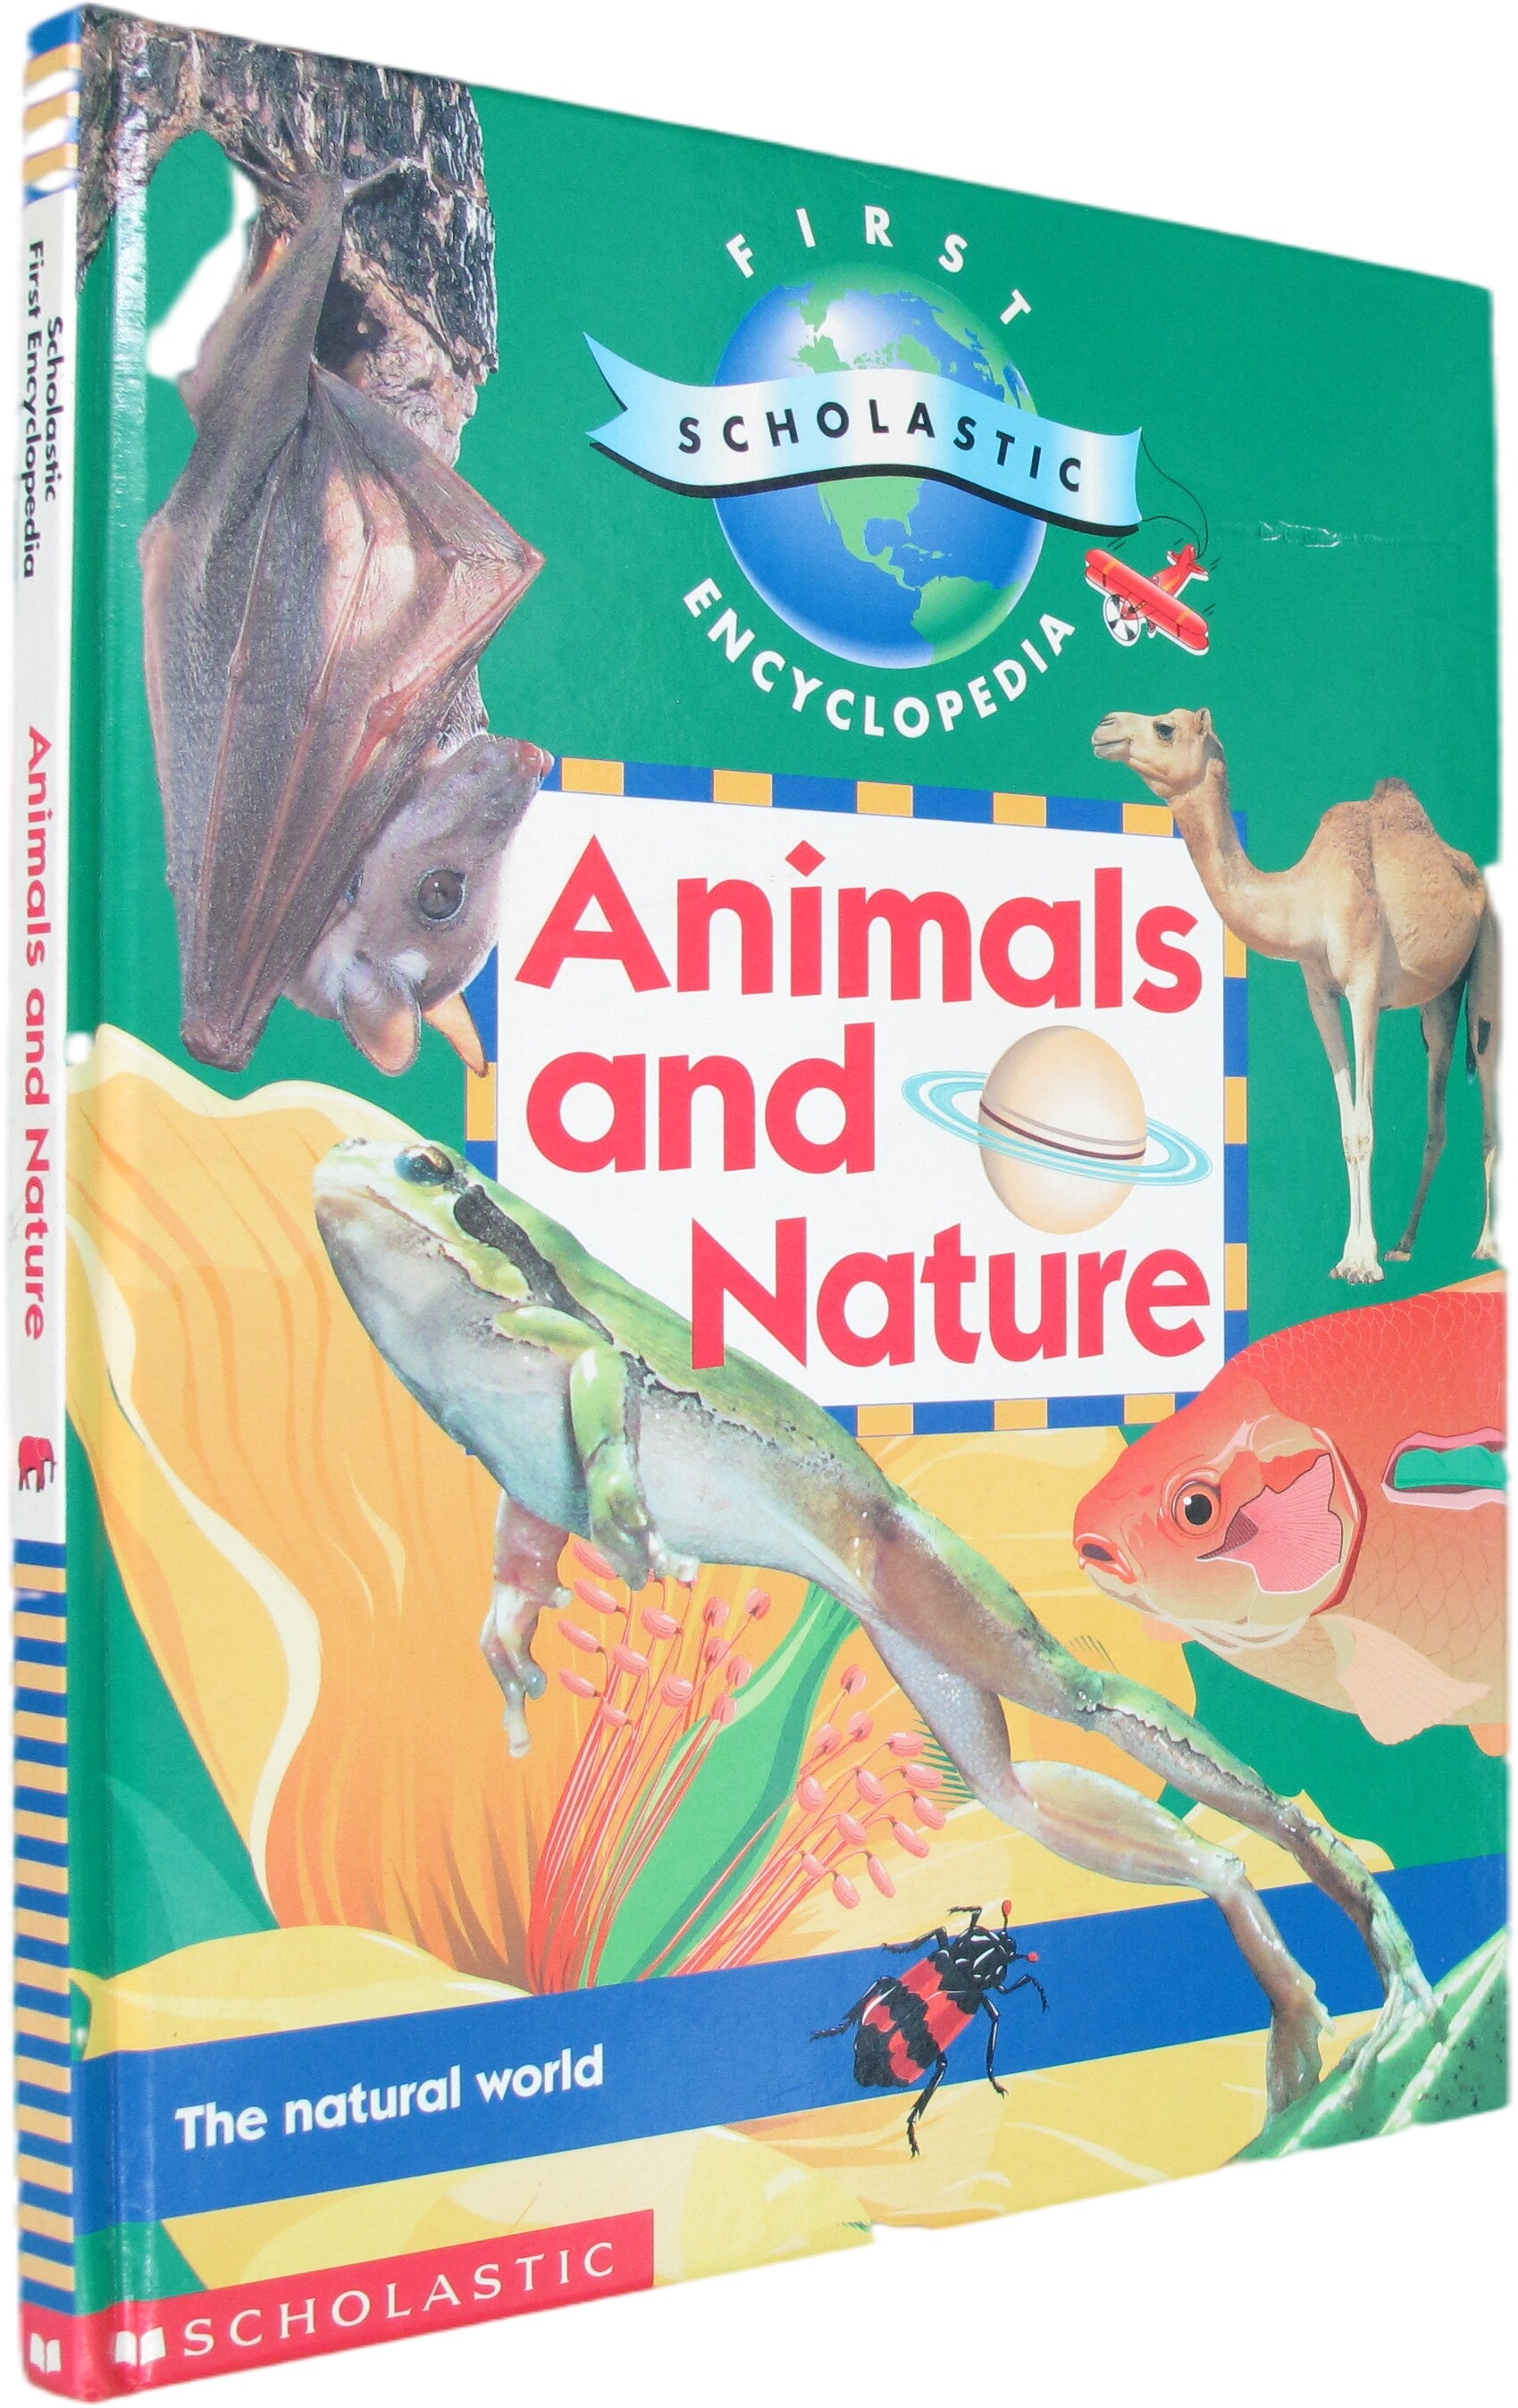 Animals and nature by Jane Amos Andrew Solway hardcover scholastic  Encyclopedia of learning and Music Series animals and nature Shendong Youth  English books | Lazada PH